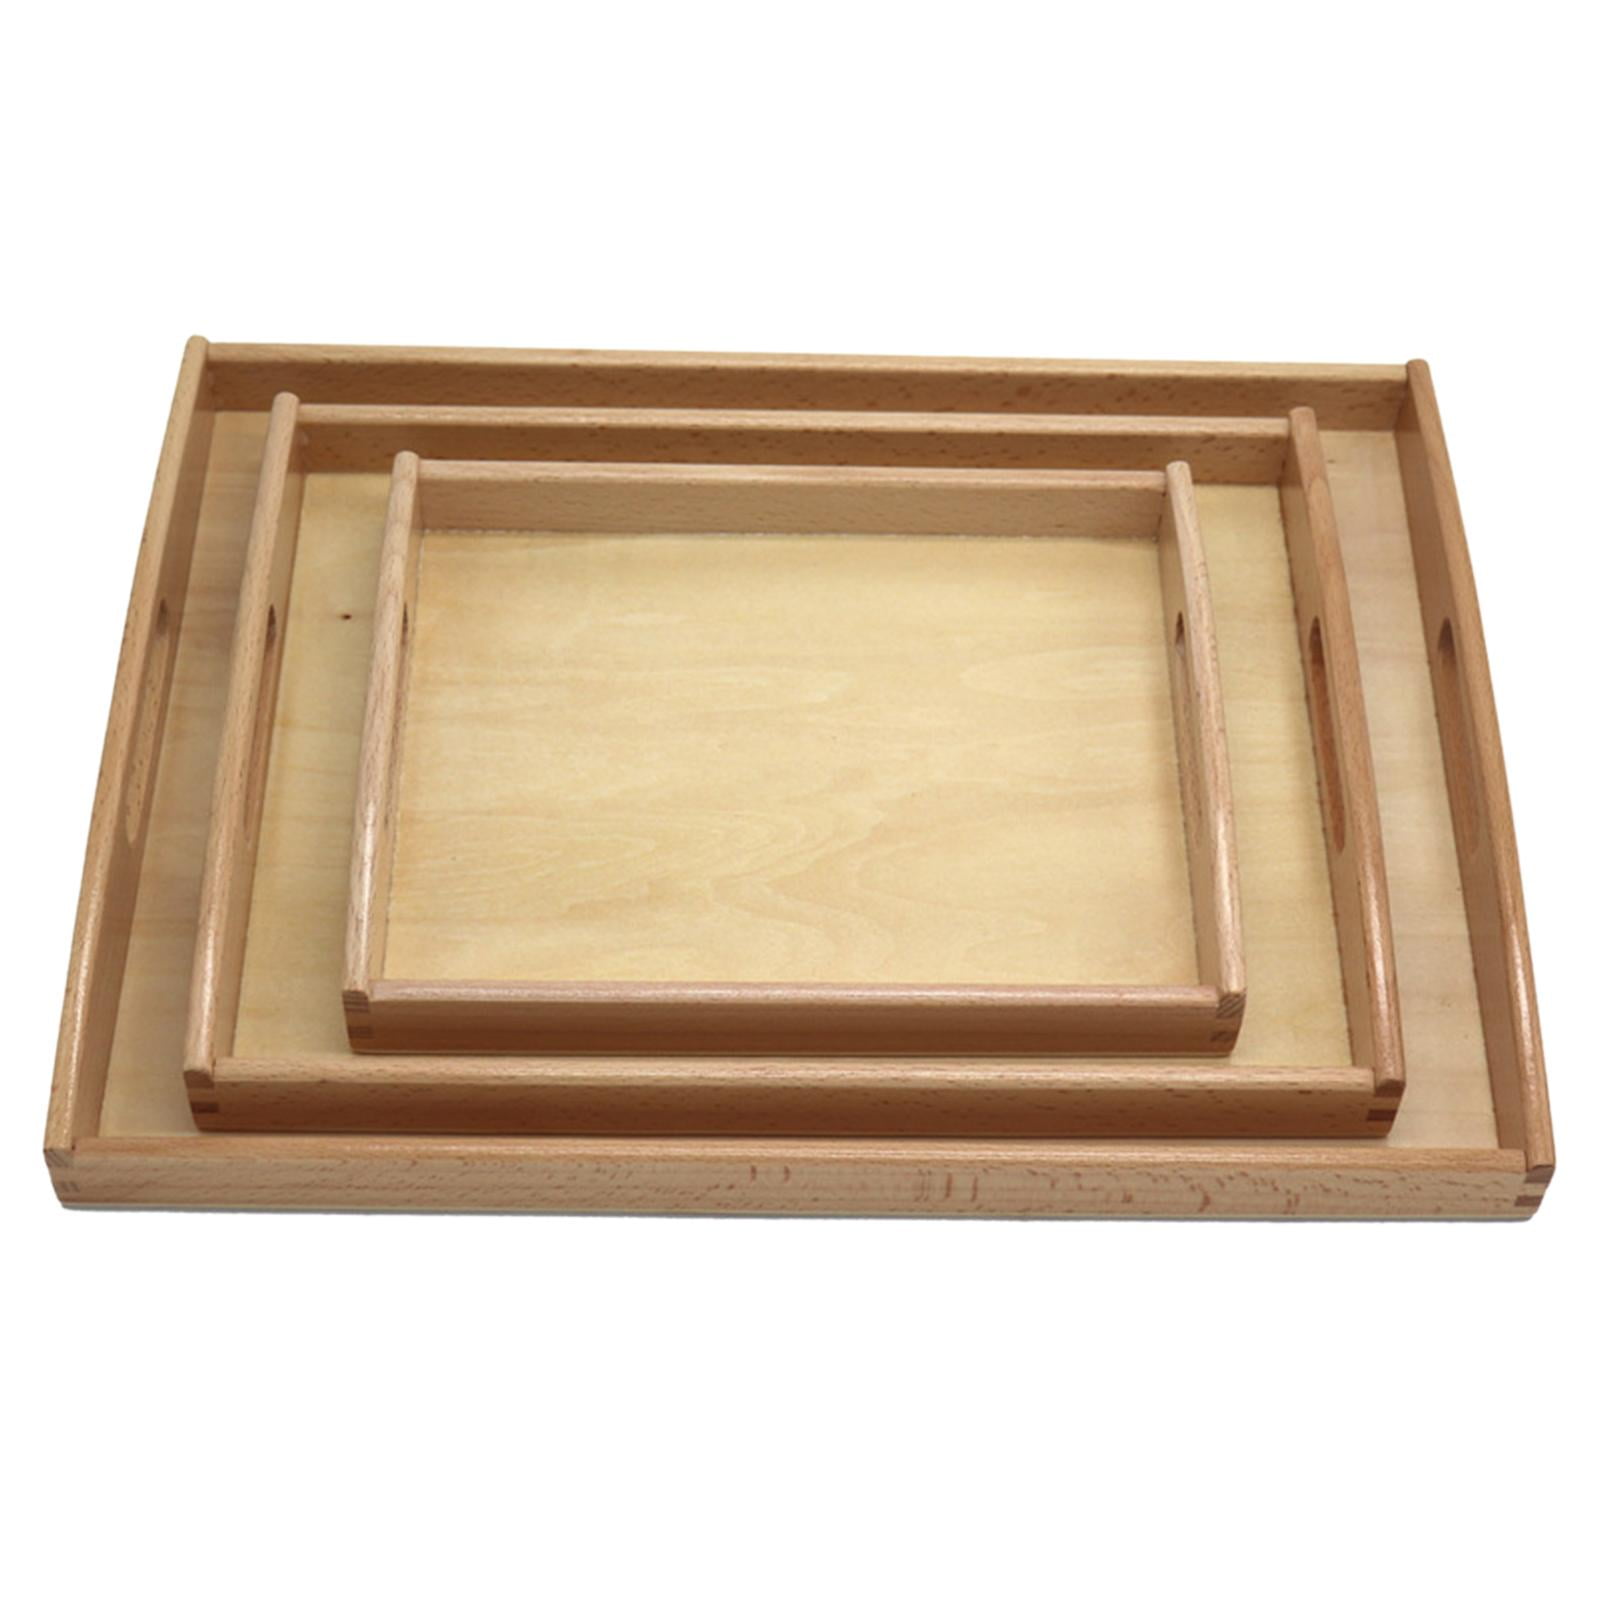 STAHAD Rustic Wooden Serving Trays 3pcs Teaching Aid Tray Trumpet Crafts  for Crafts for Sand Tracing Tray Coffee Table Tray Bathroom Tray Montessori